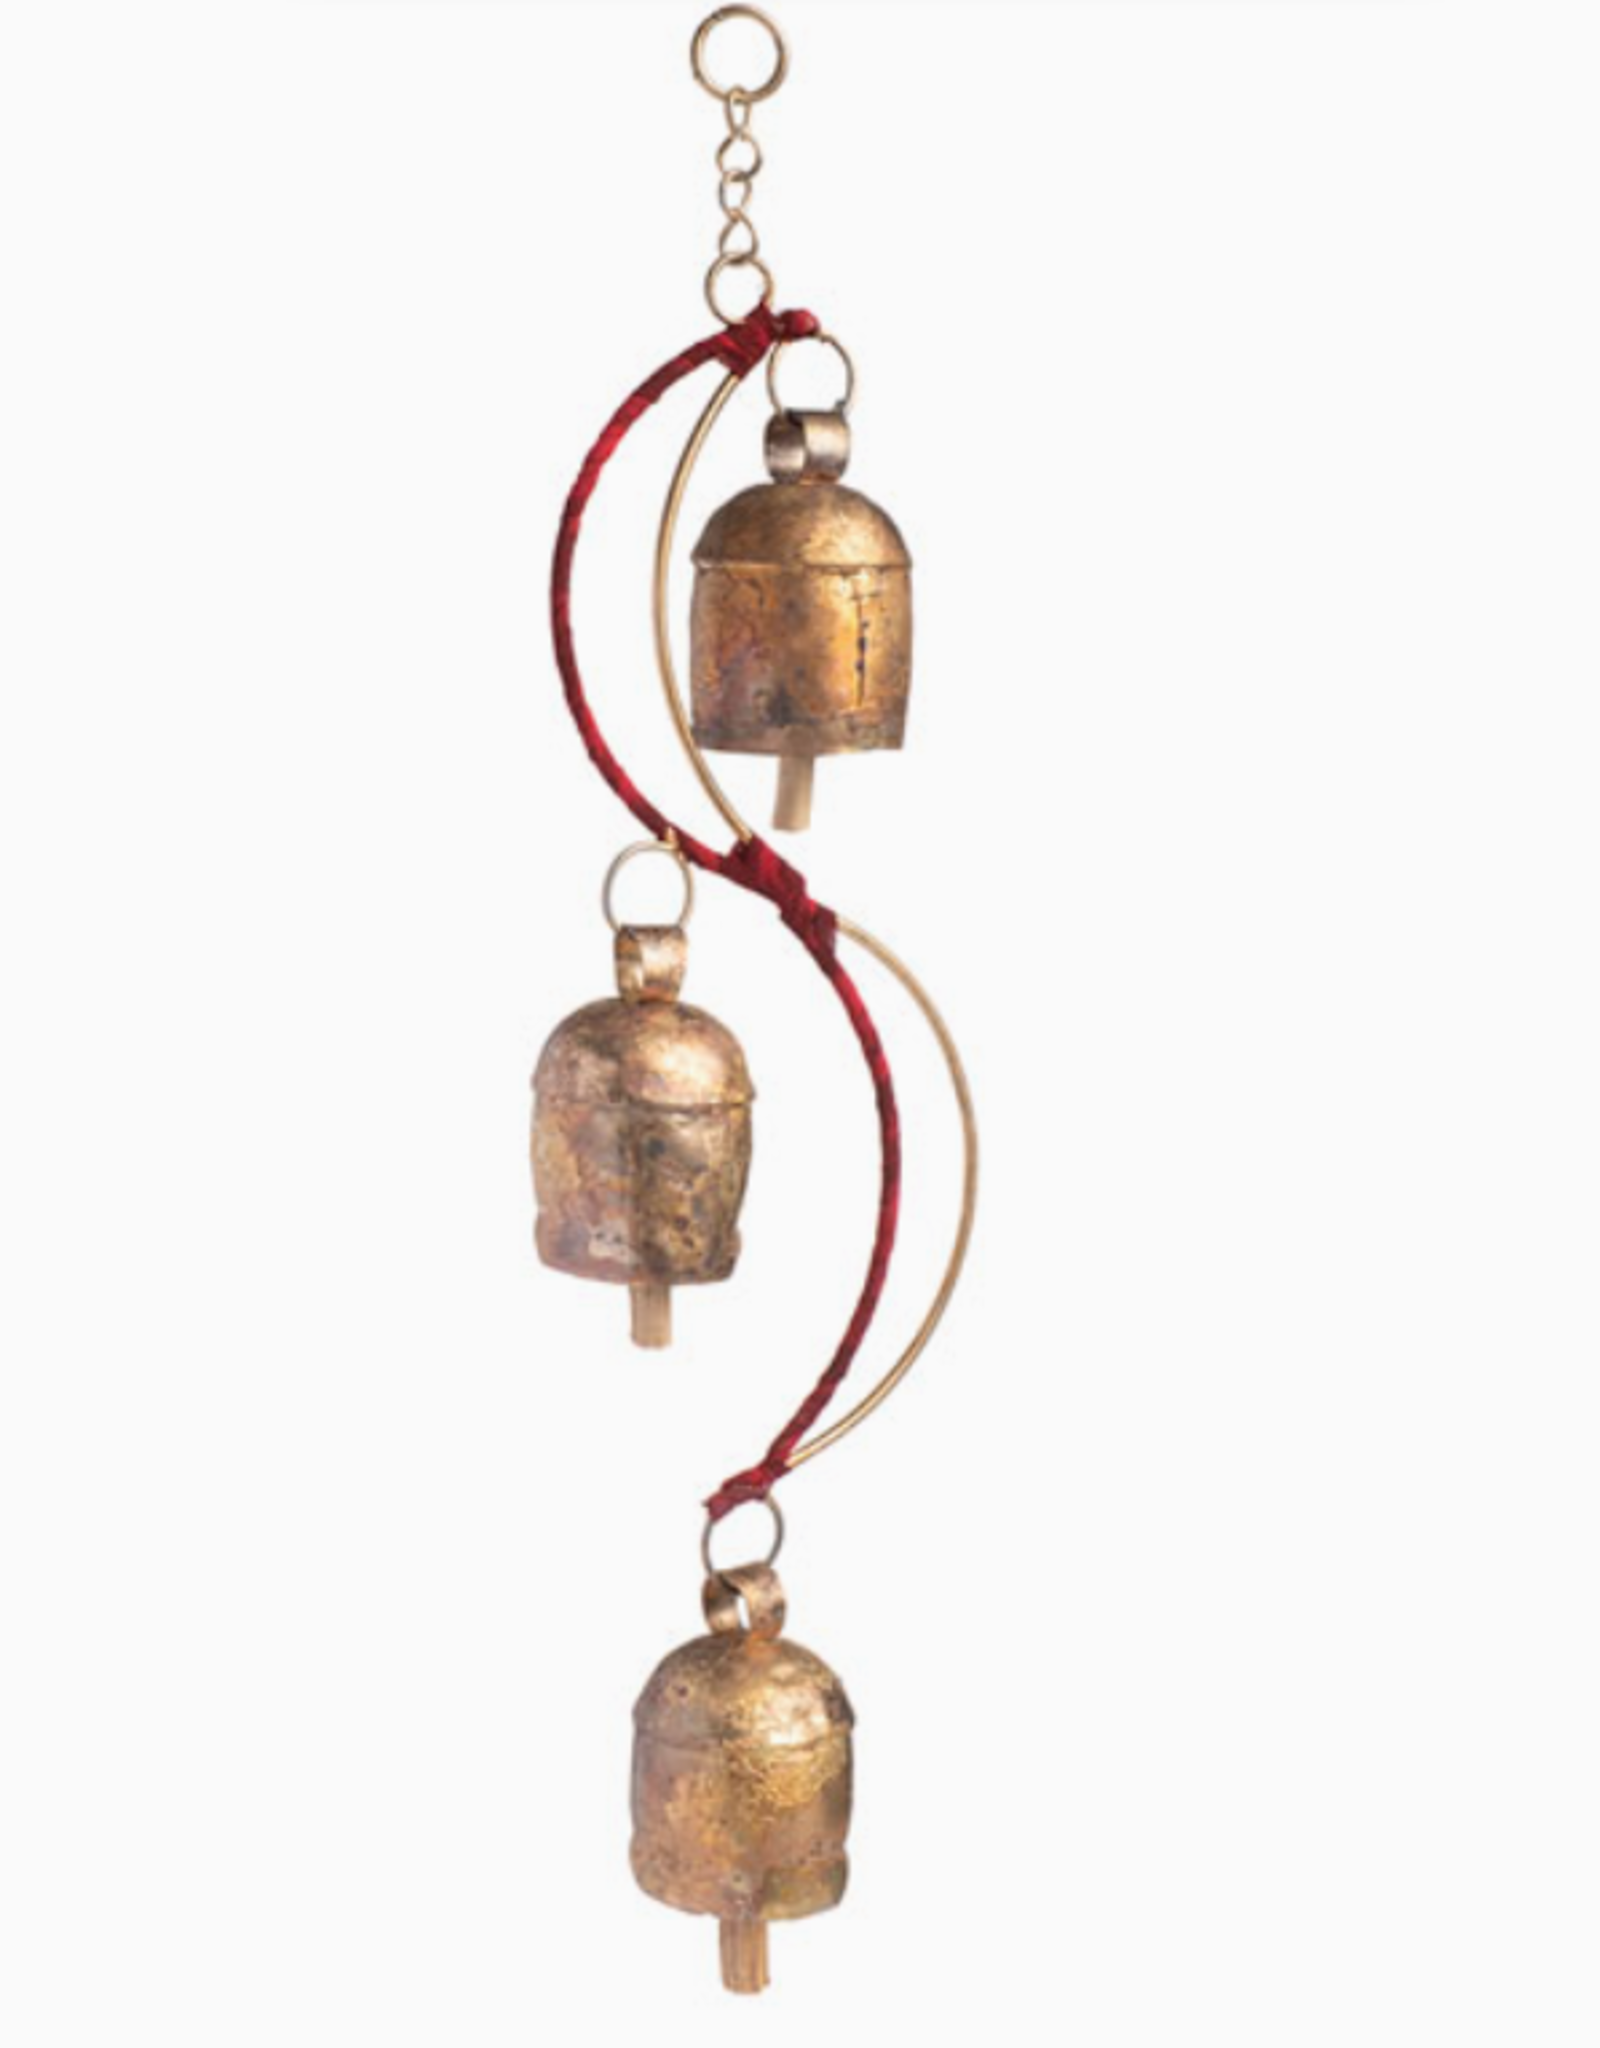 Matr Boomie Delicate Song Sari Wrap Bells Wind Chime - Assorted